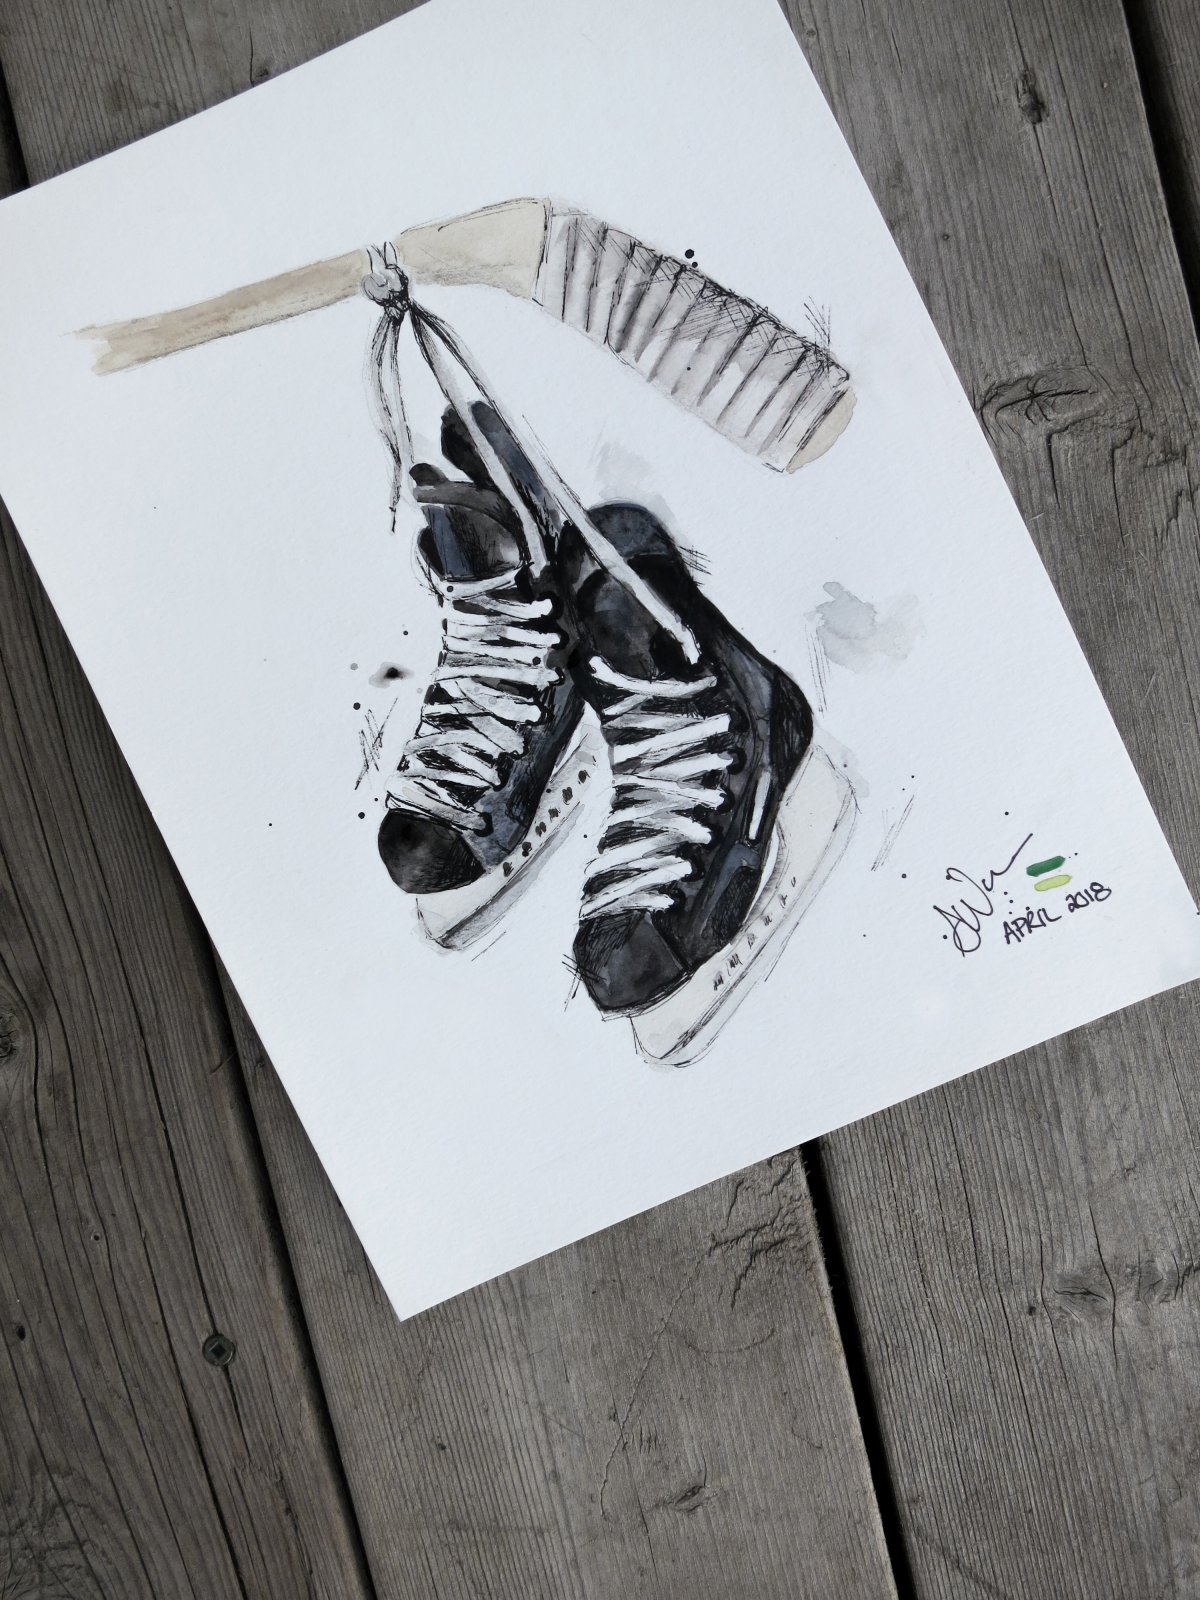 Adria Warren is selling this print, with 100 per cent of the proceeds going to victims and families affected in the Humboldt Broncos bus crash.